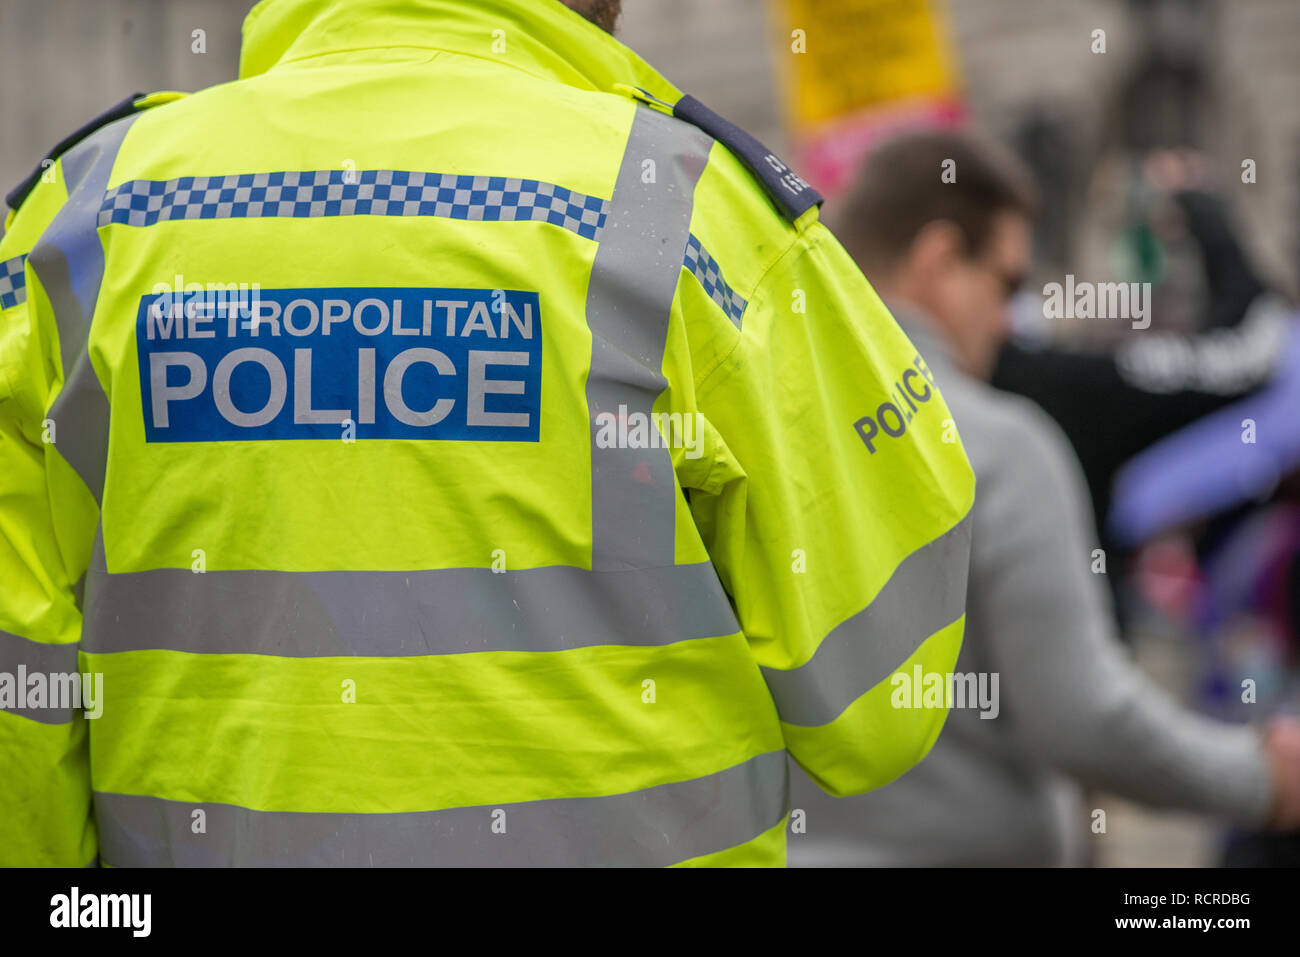 Metropolitan Police sign on the back of a high visibility jacket worn by police officers escorting a street demonstration through central London, UK. Stock Photo